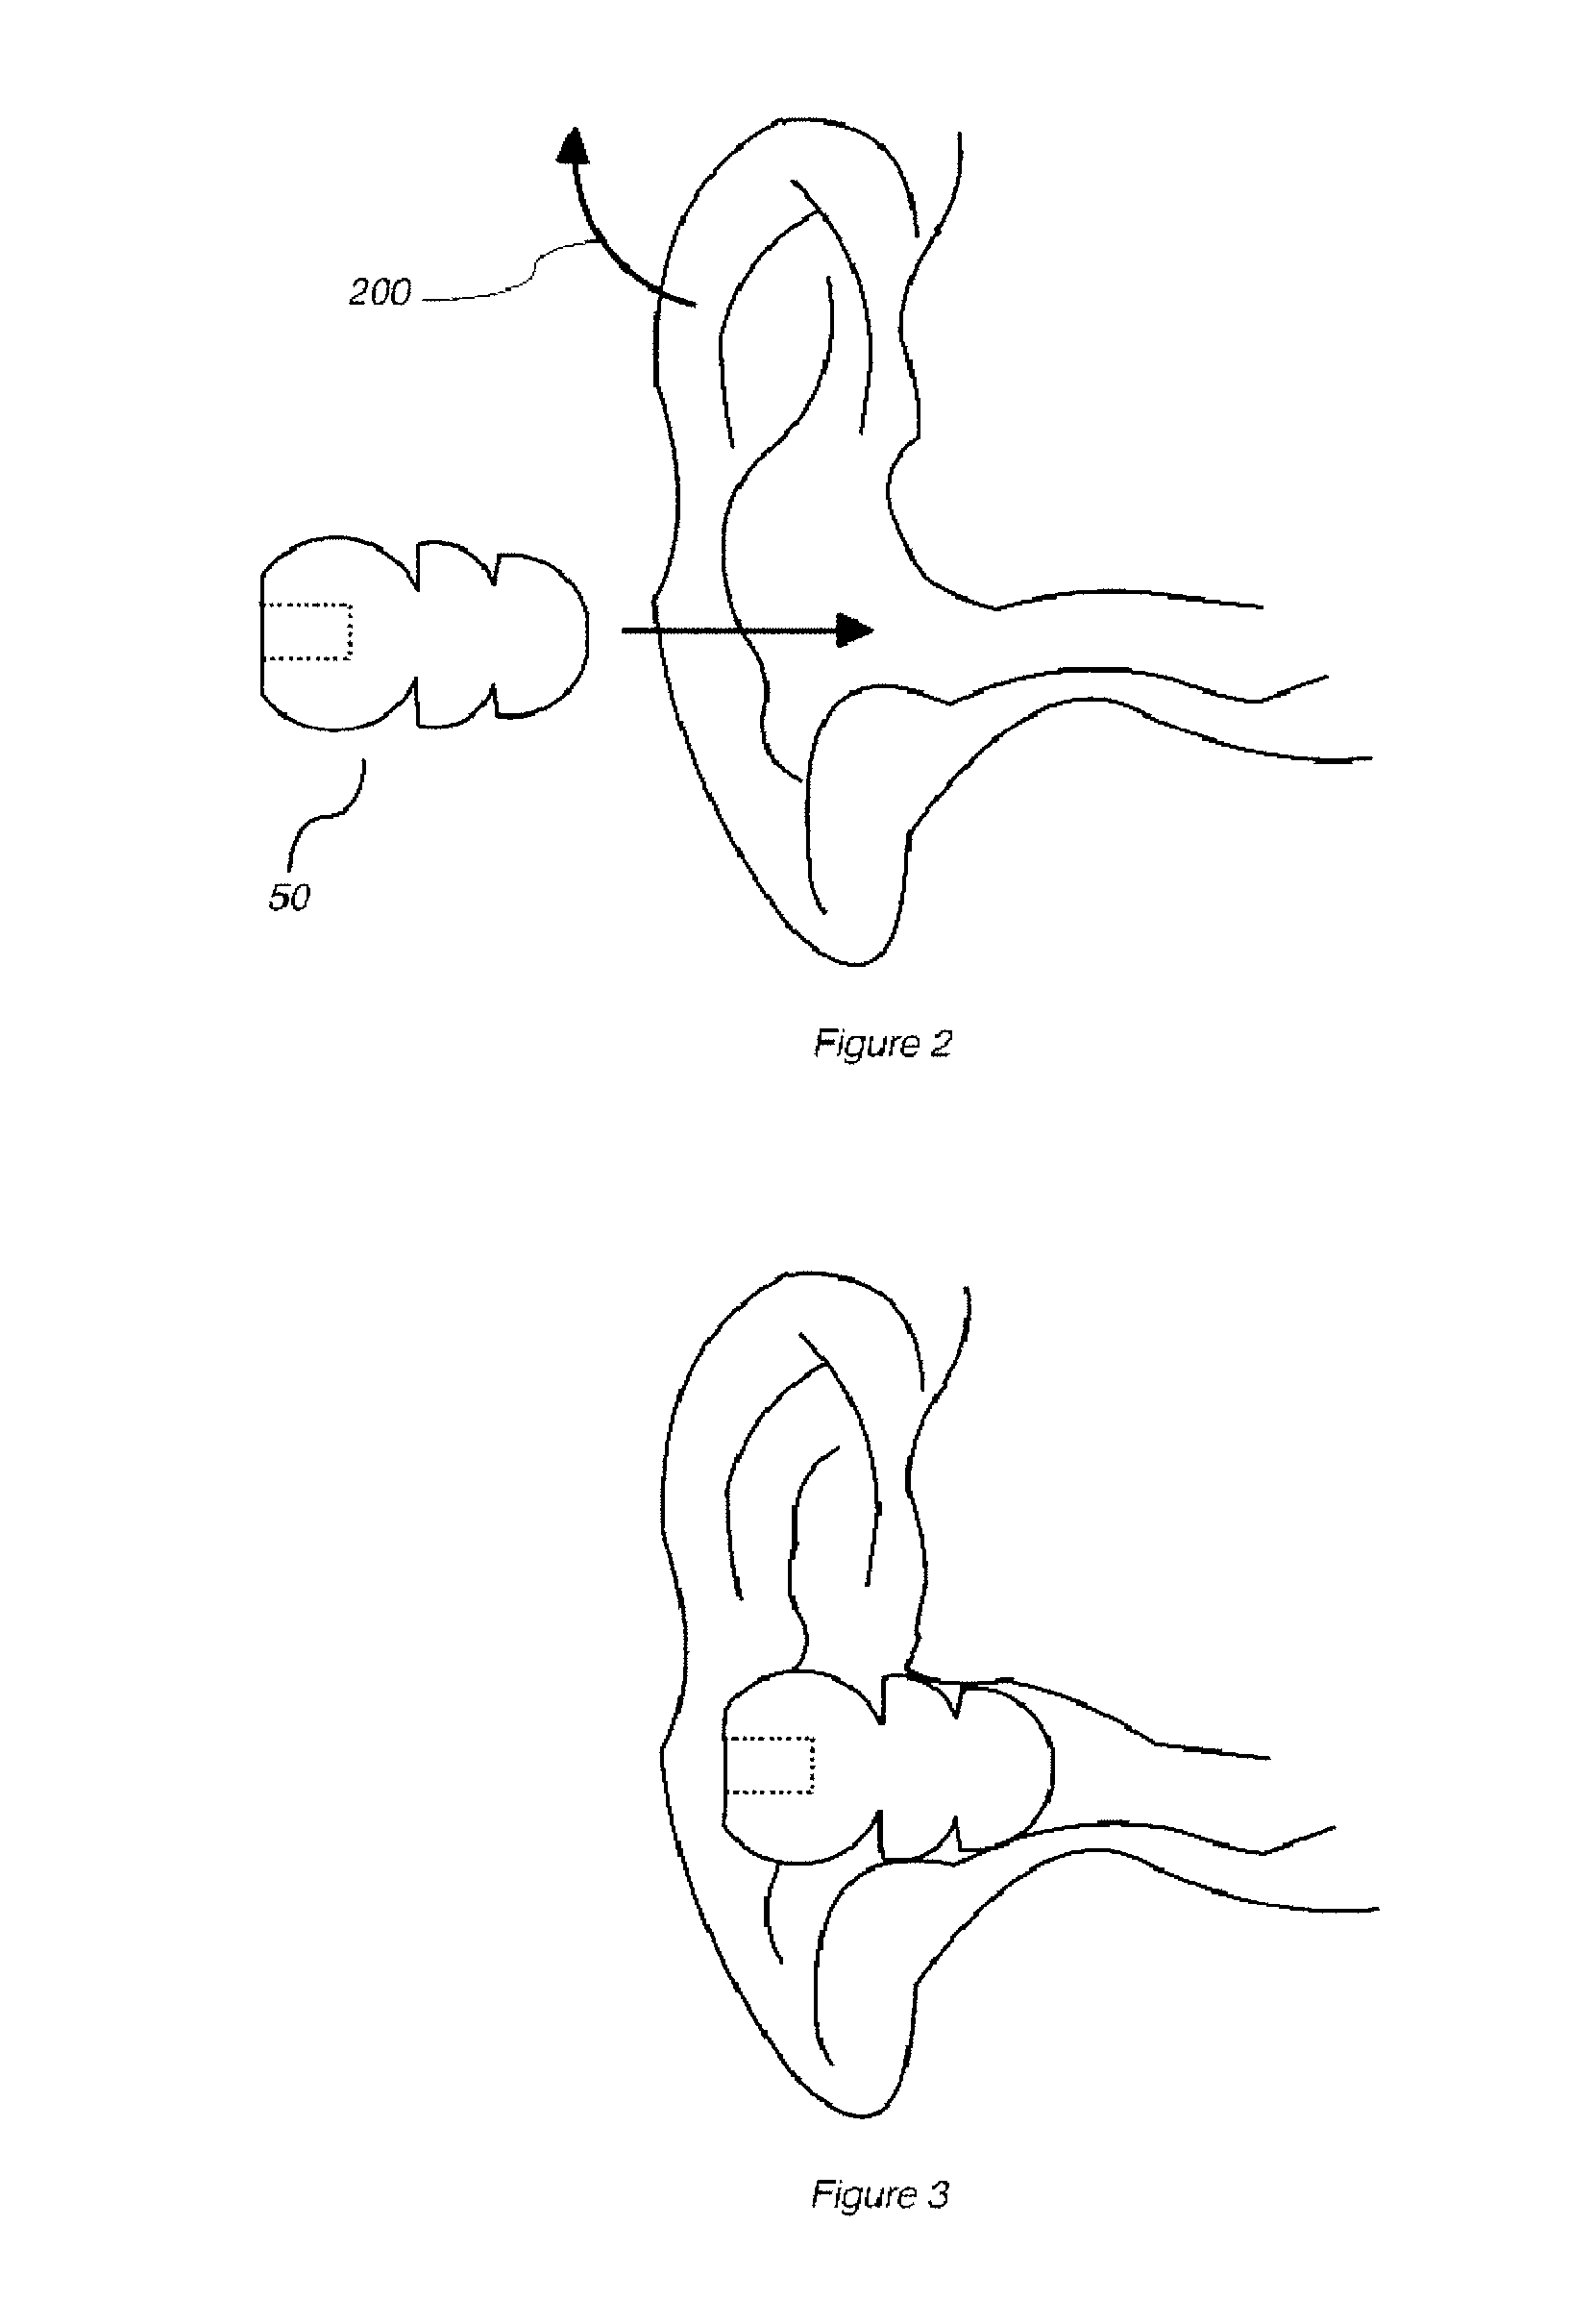 Novel hearing protection device and method and secure earbud assembly